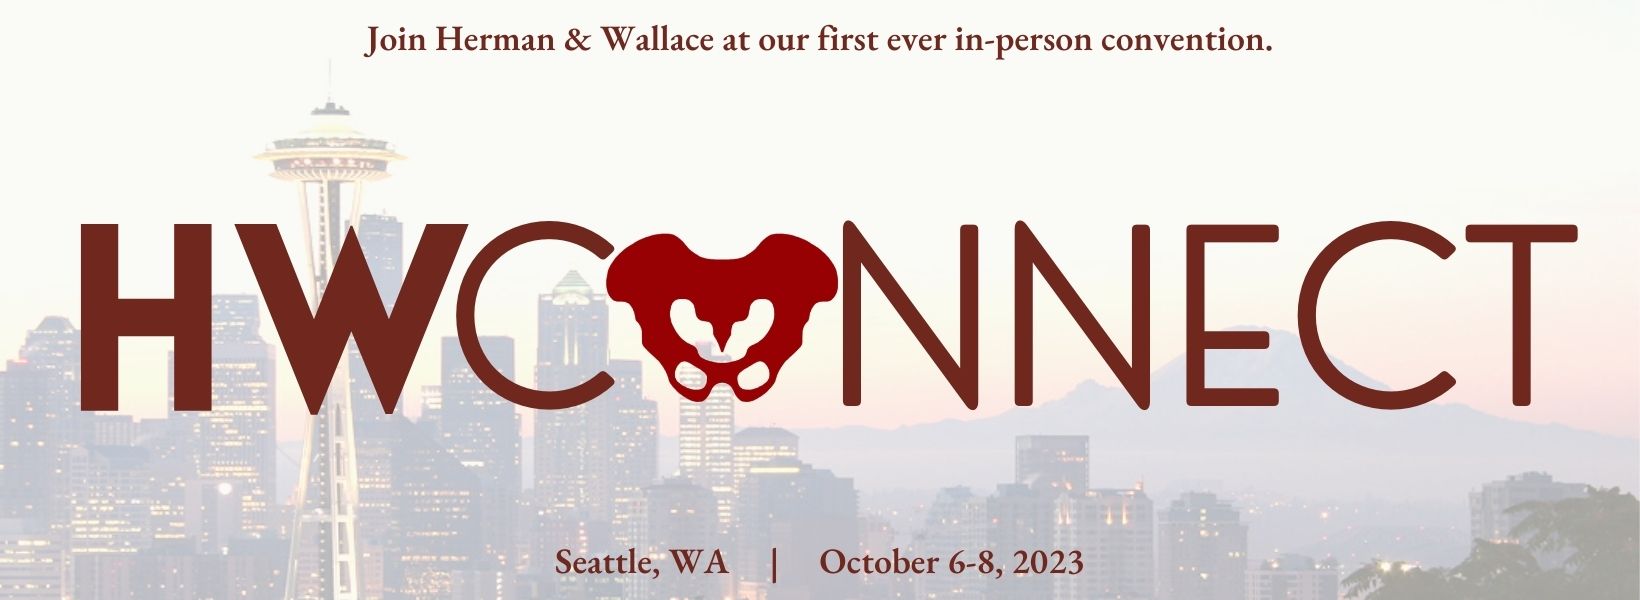 Join Herman & Wallace At Our First Ever In-Person Convention!